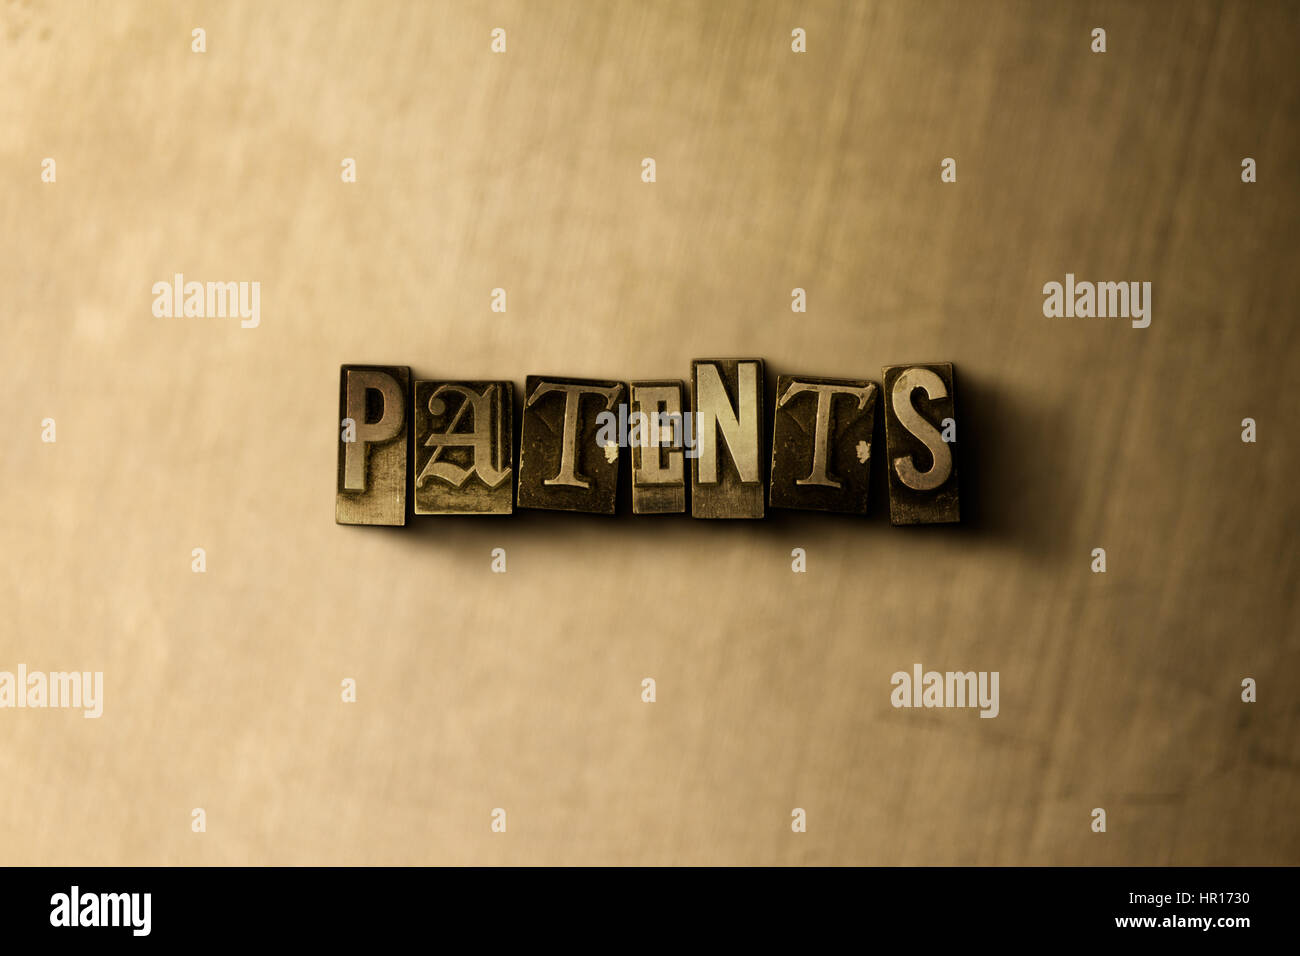 PATENTS - close-up of grungy vintage typeset word on metal backdrop. Royalty free stock - 3D rendered stock image.  Can be used for online banner ads  Stock Photo